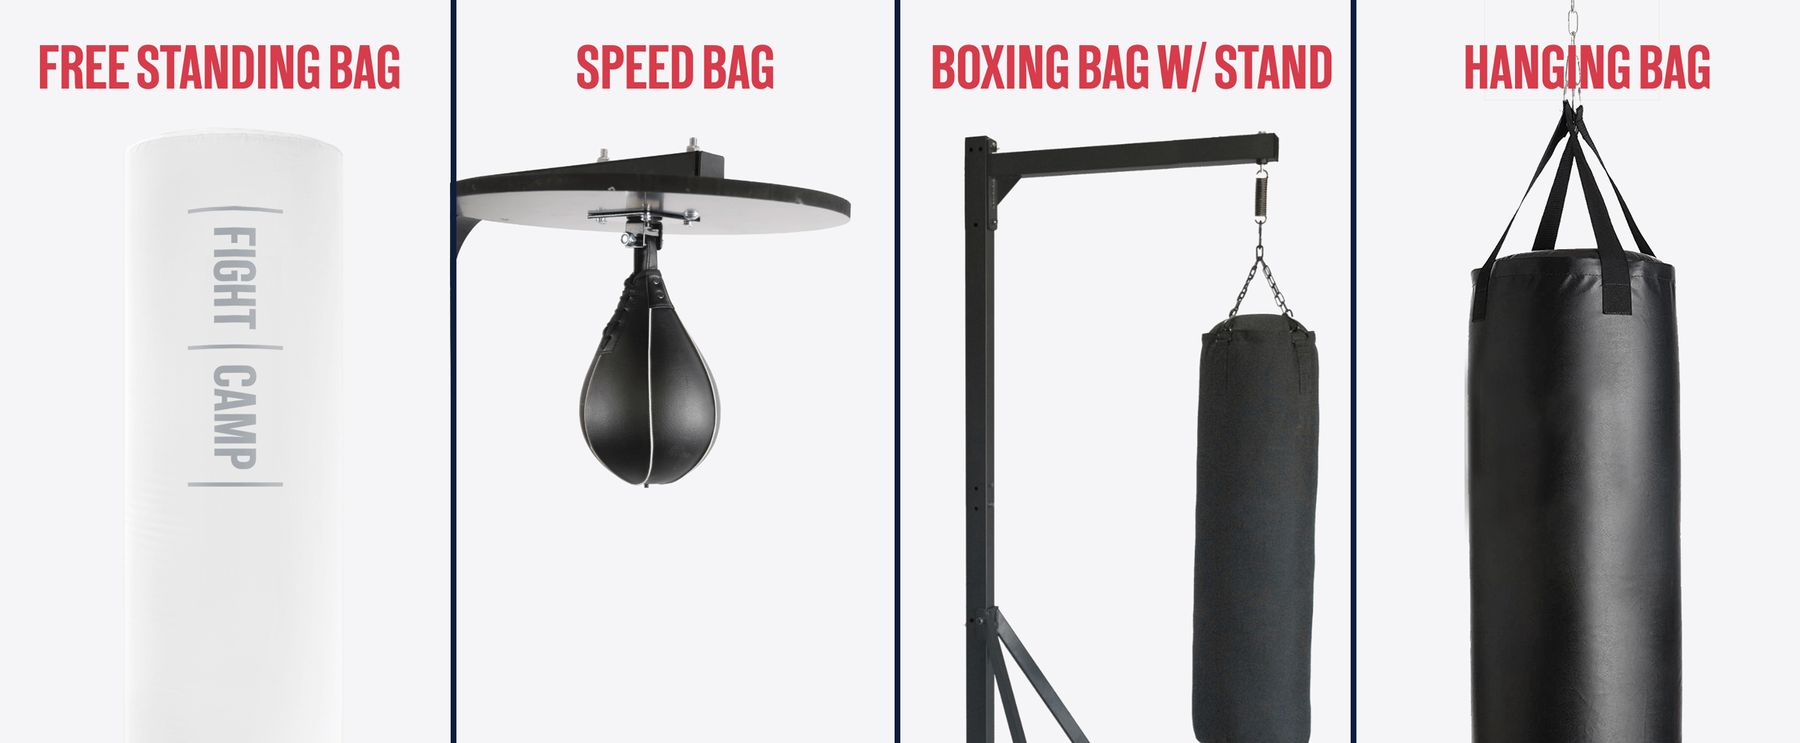 Free Standing Boxing Bag Fitness Exercise Kickboxing Bags Adult Youth for Home Heavy-Duty Boxing Punching Bag Rack 